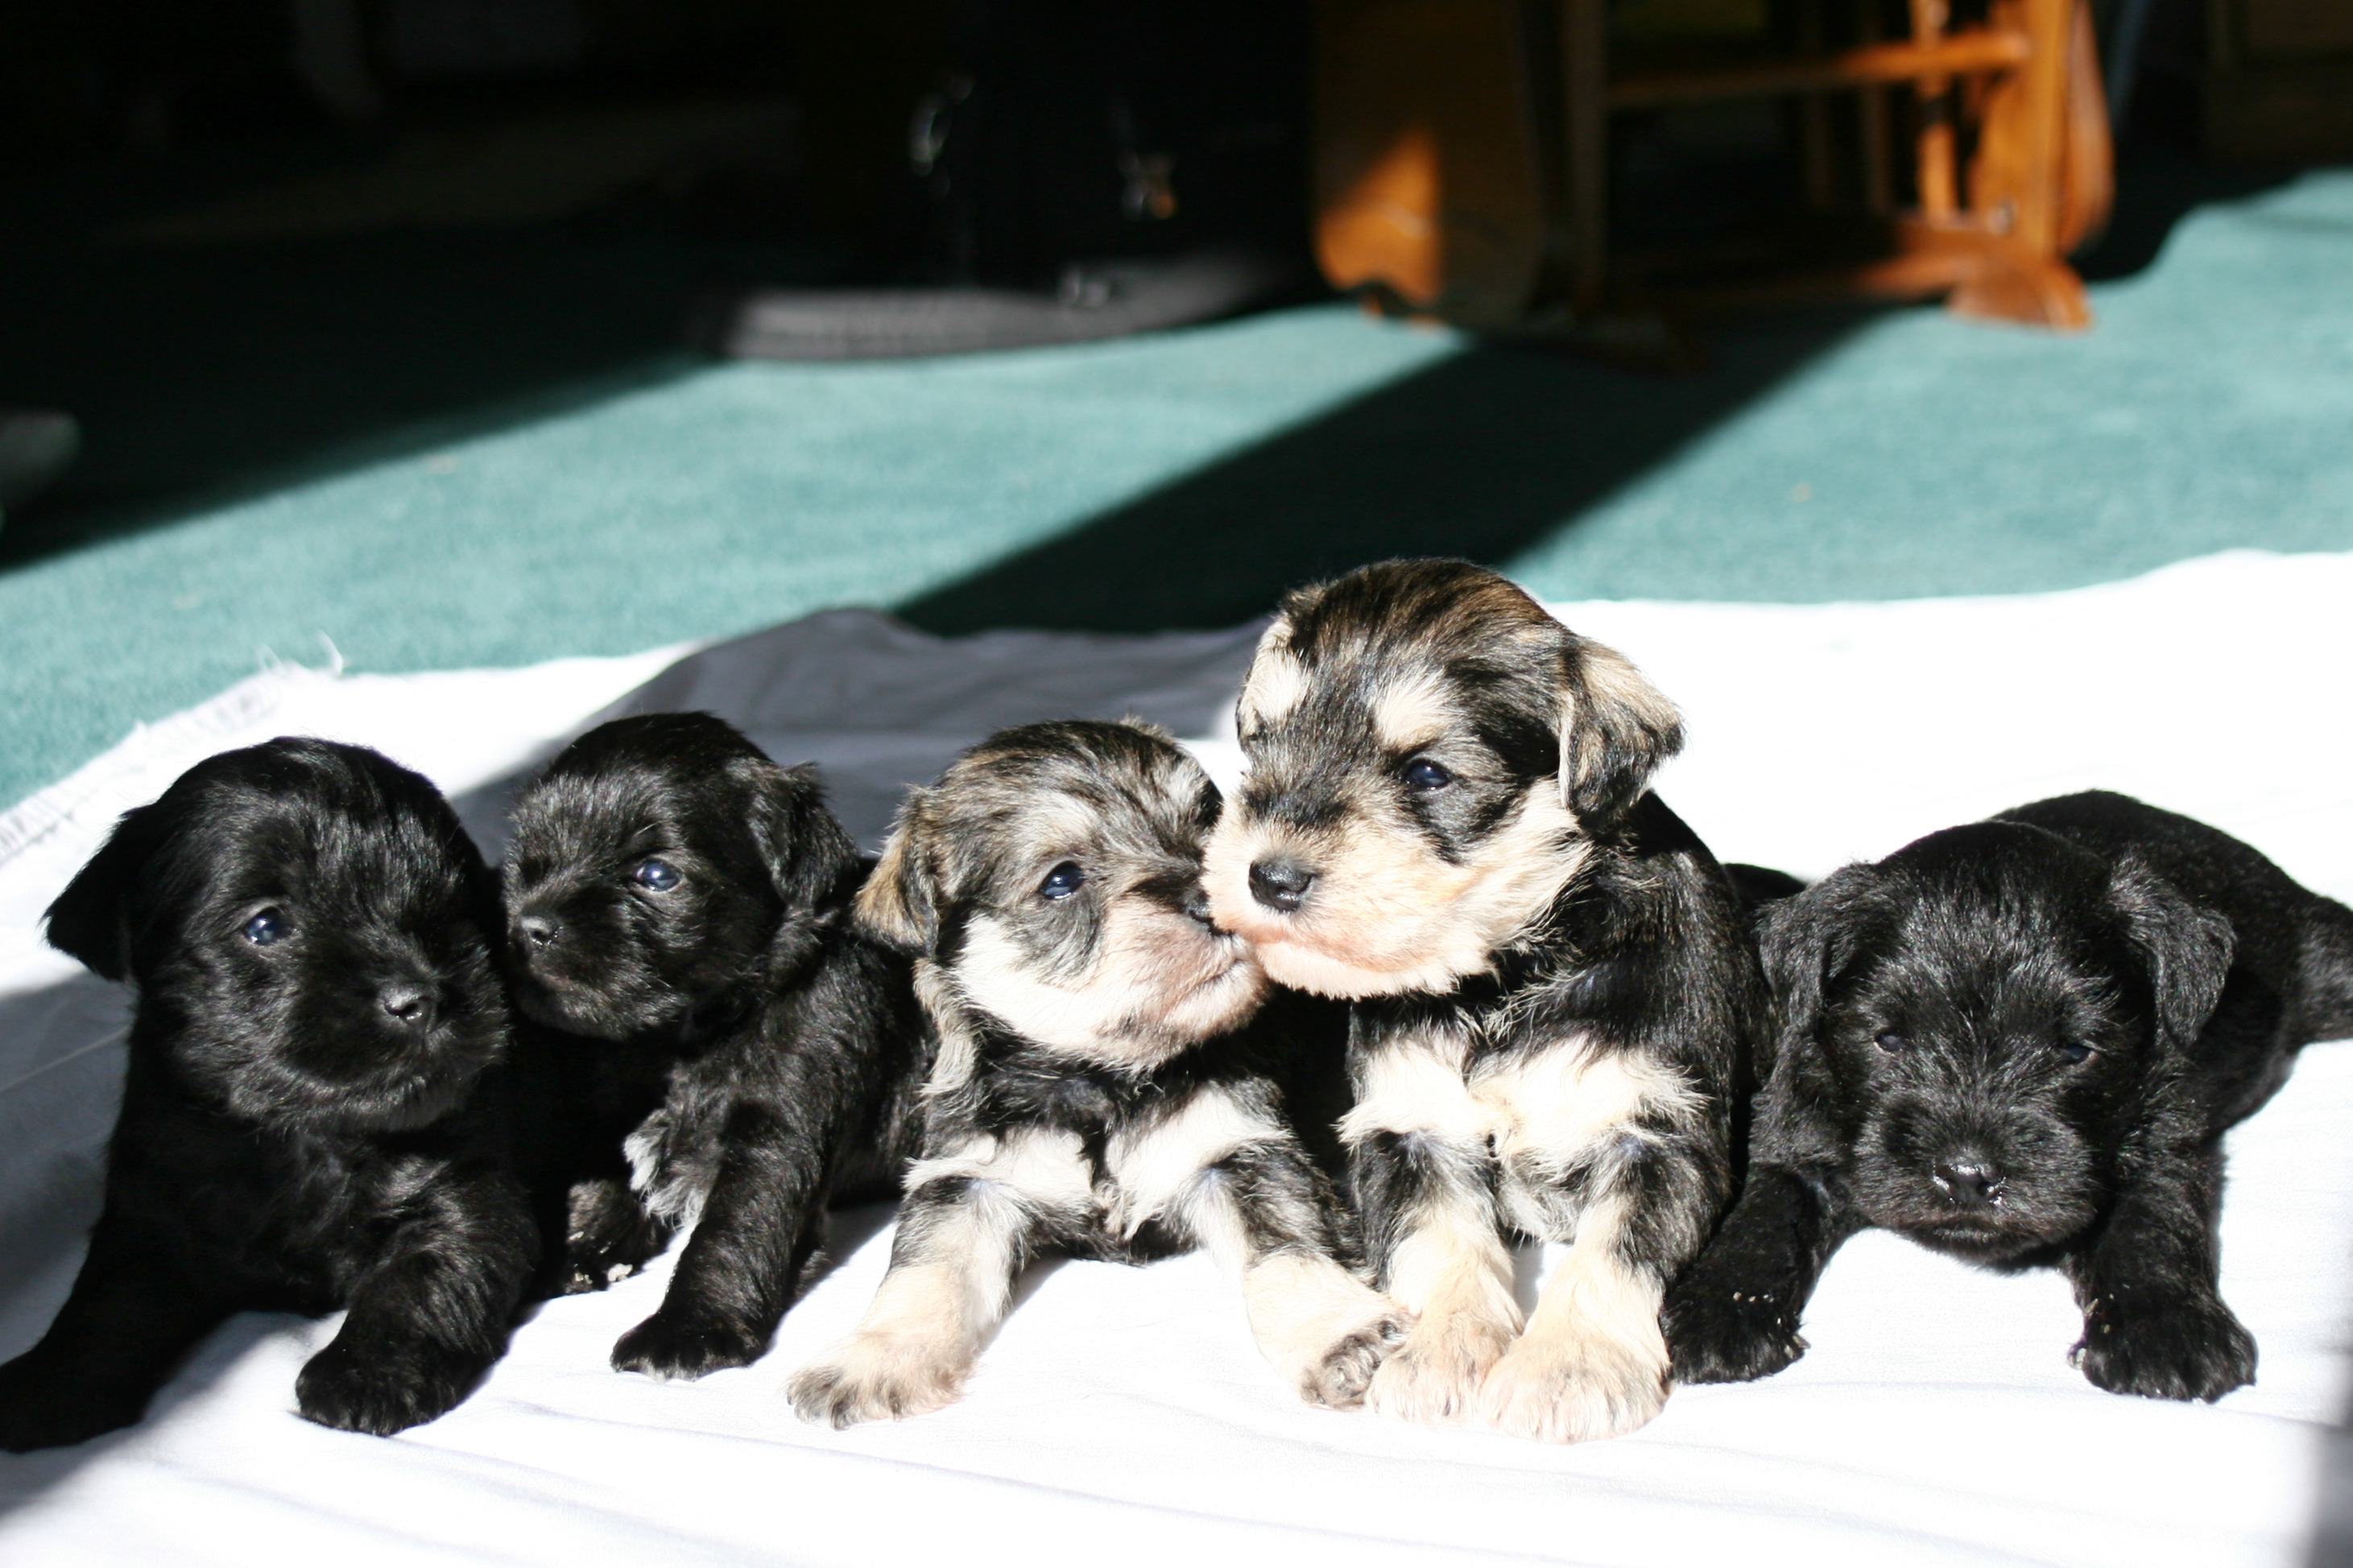 new puppies, taken at 3 weeks old - all sold